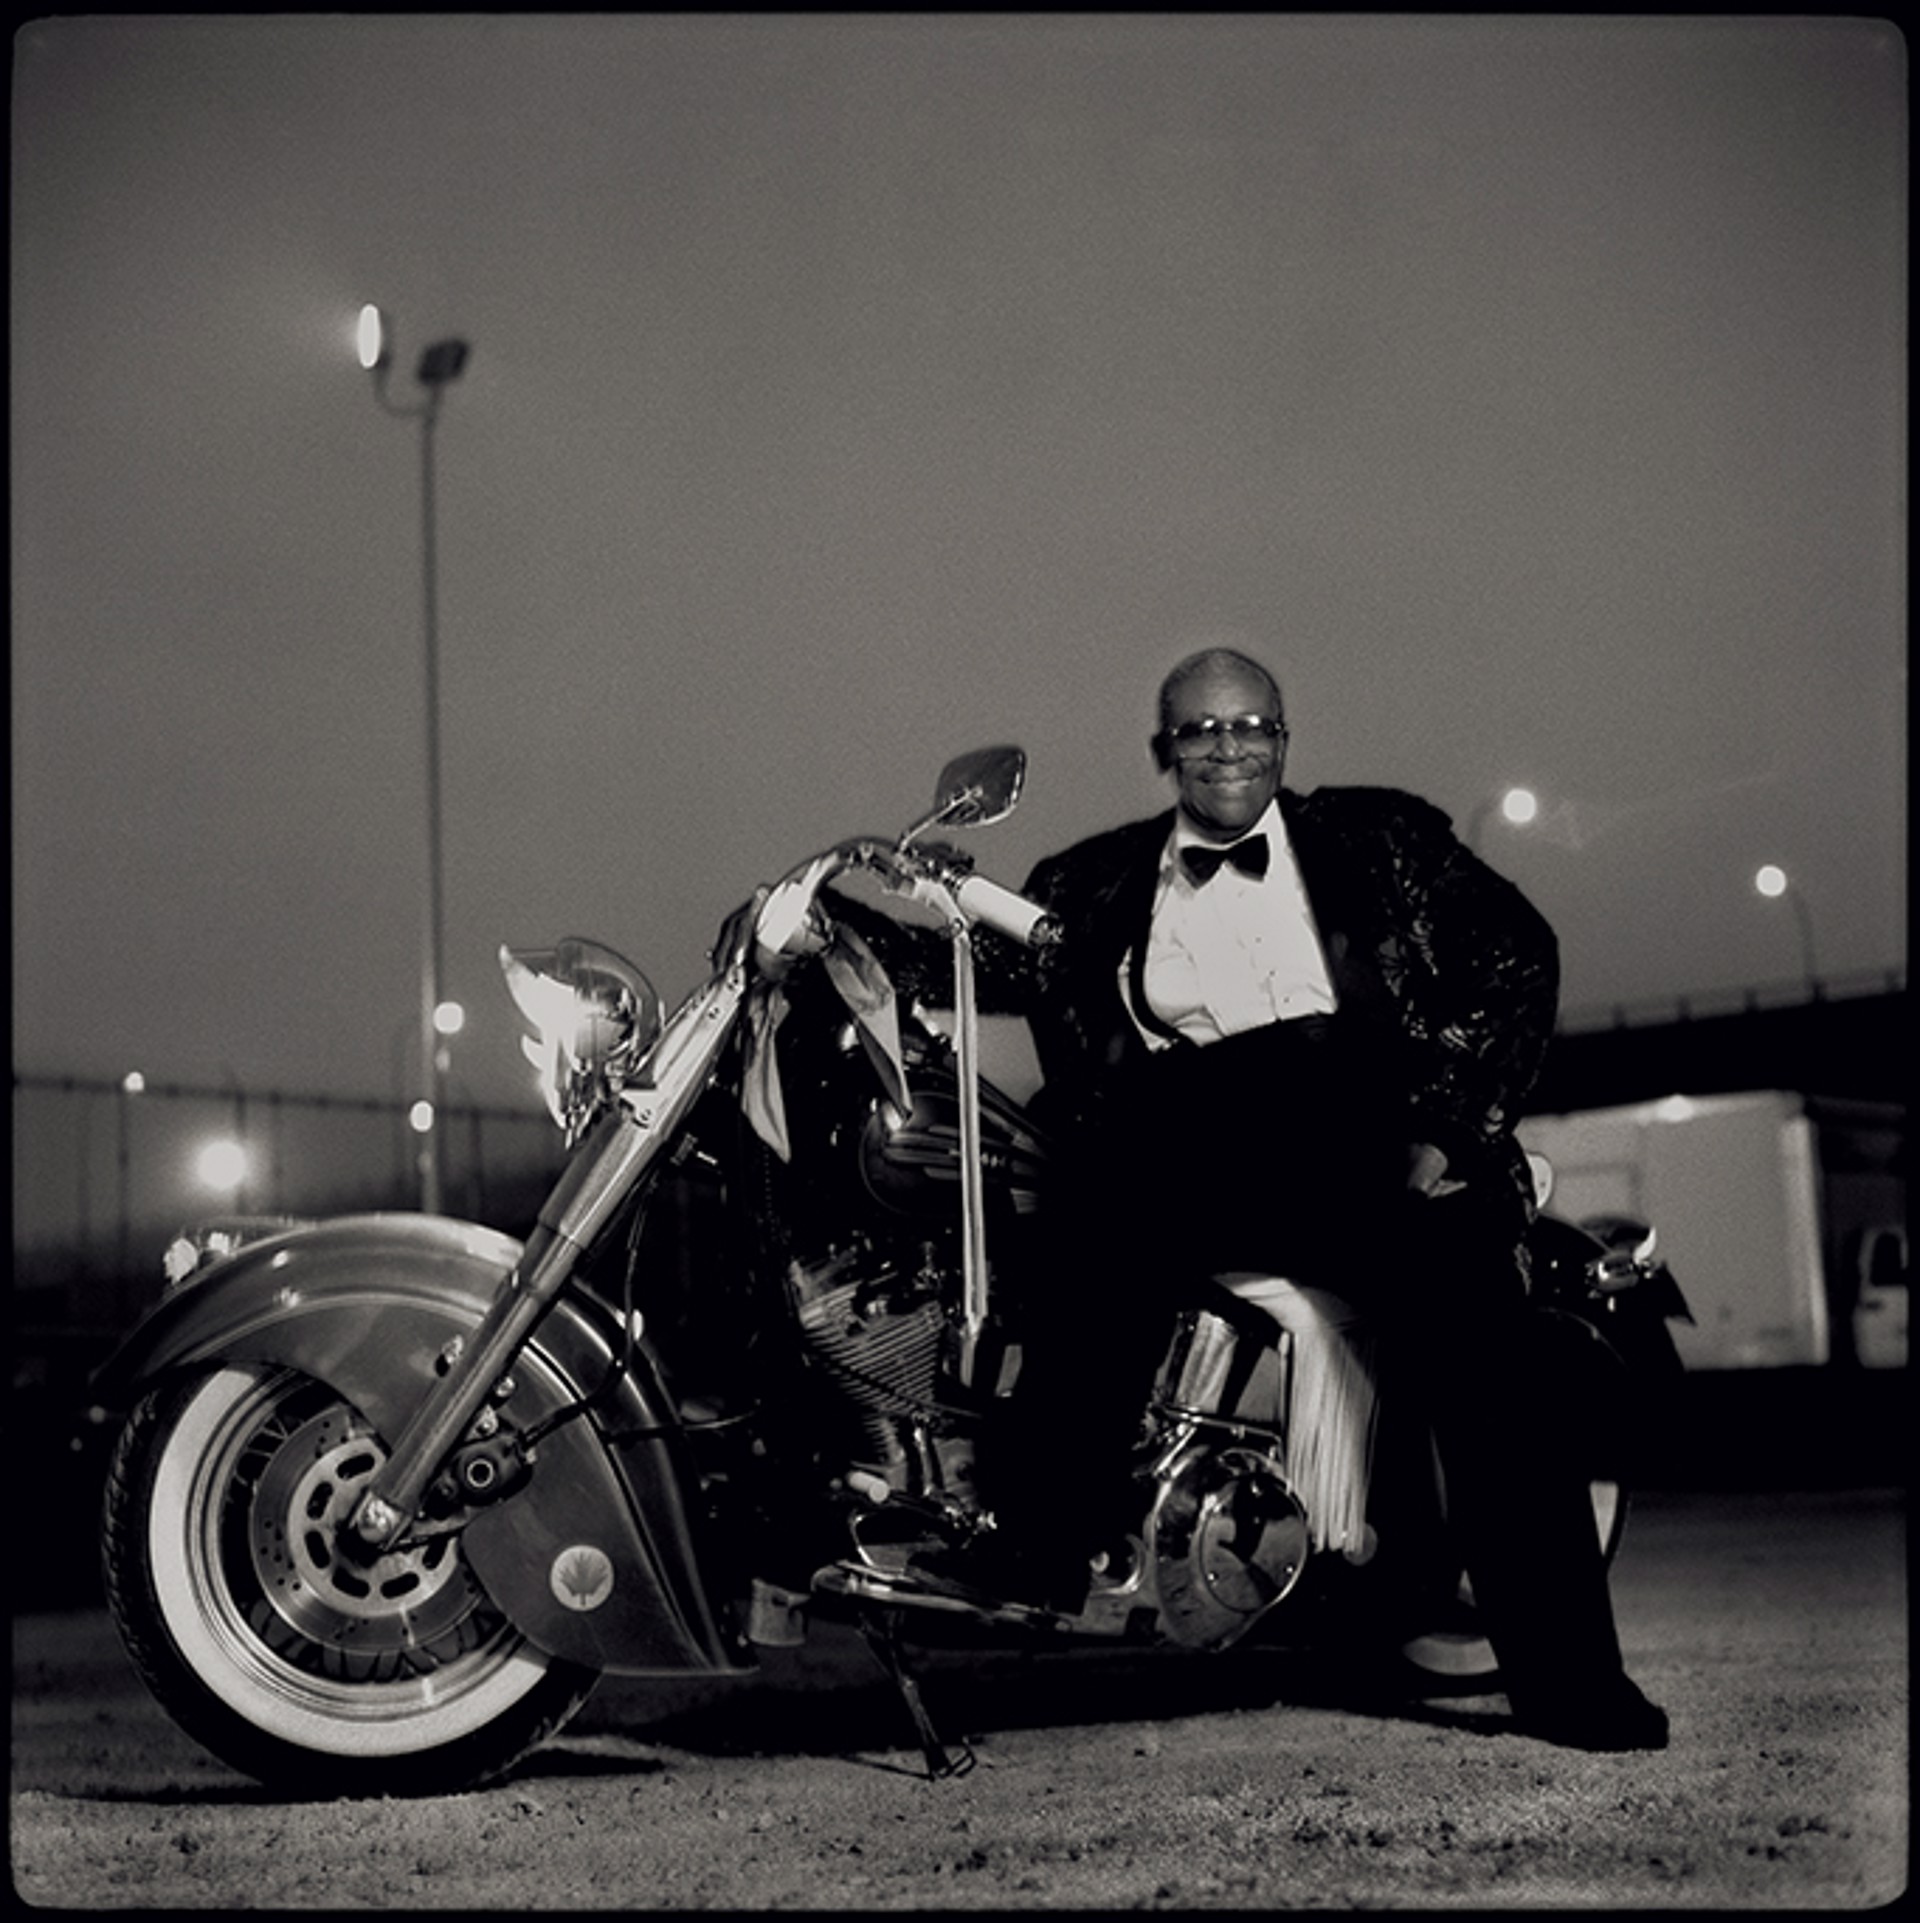 97055 B.B. King On Motorcycle BW by Timothy White